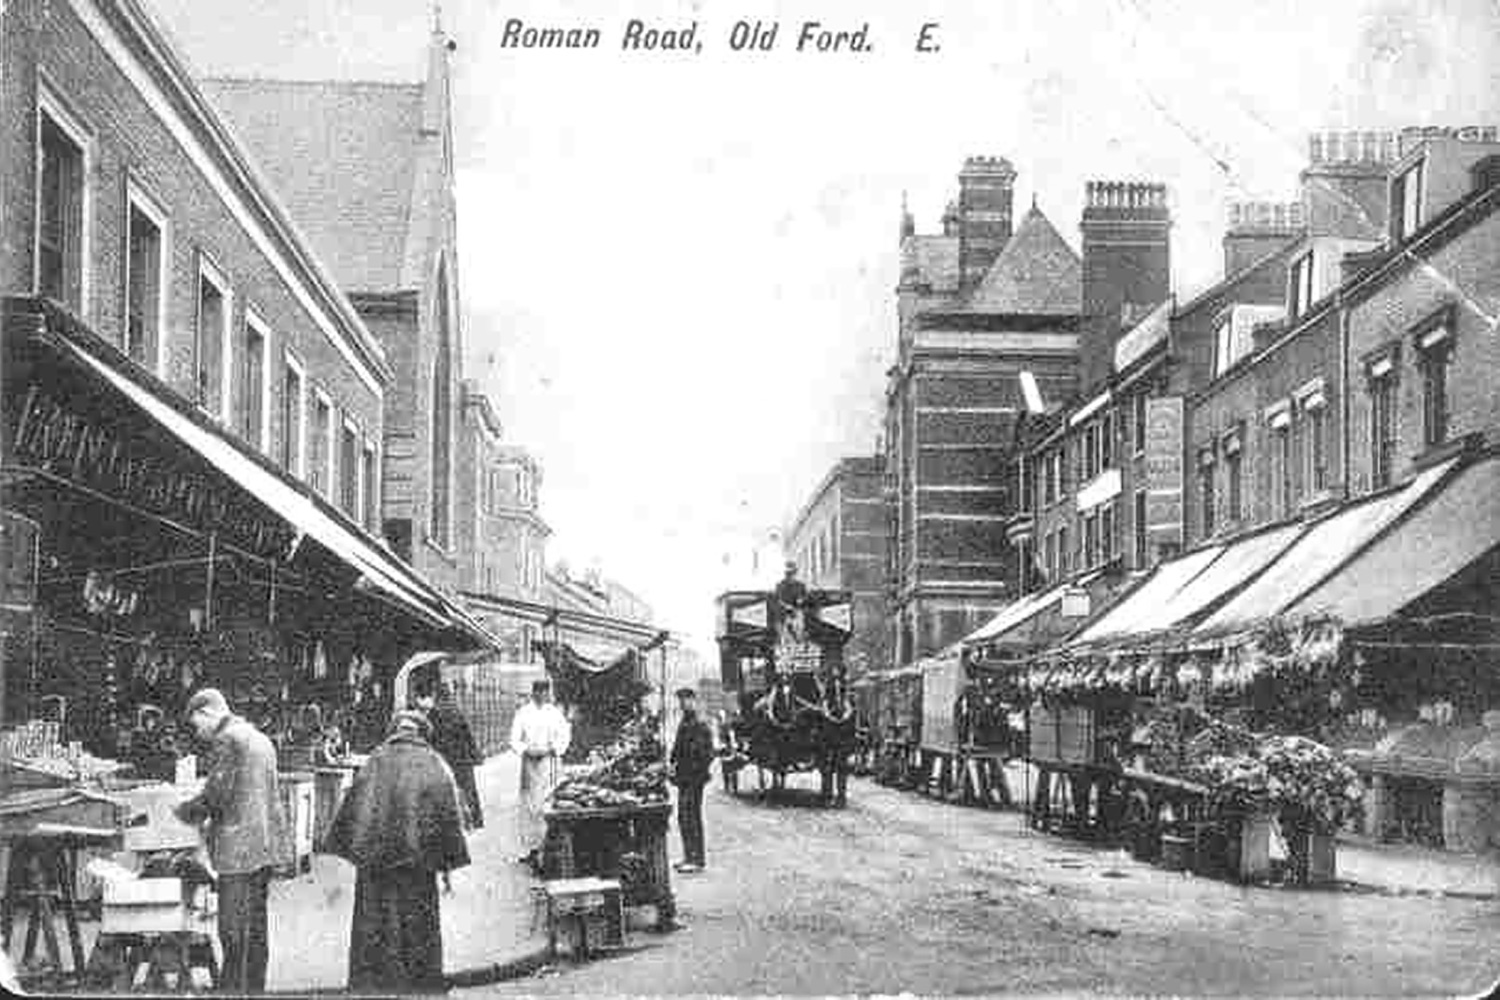 Image of Roman Road showing a horse and carriage, shops with awnings and market stalls